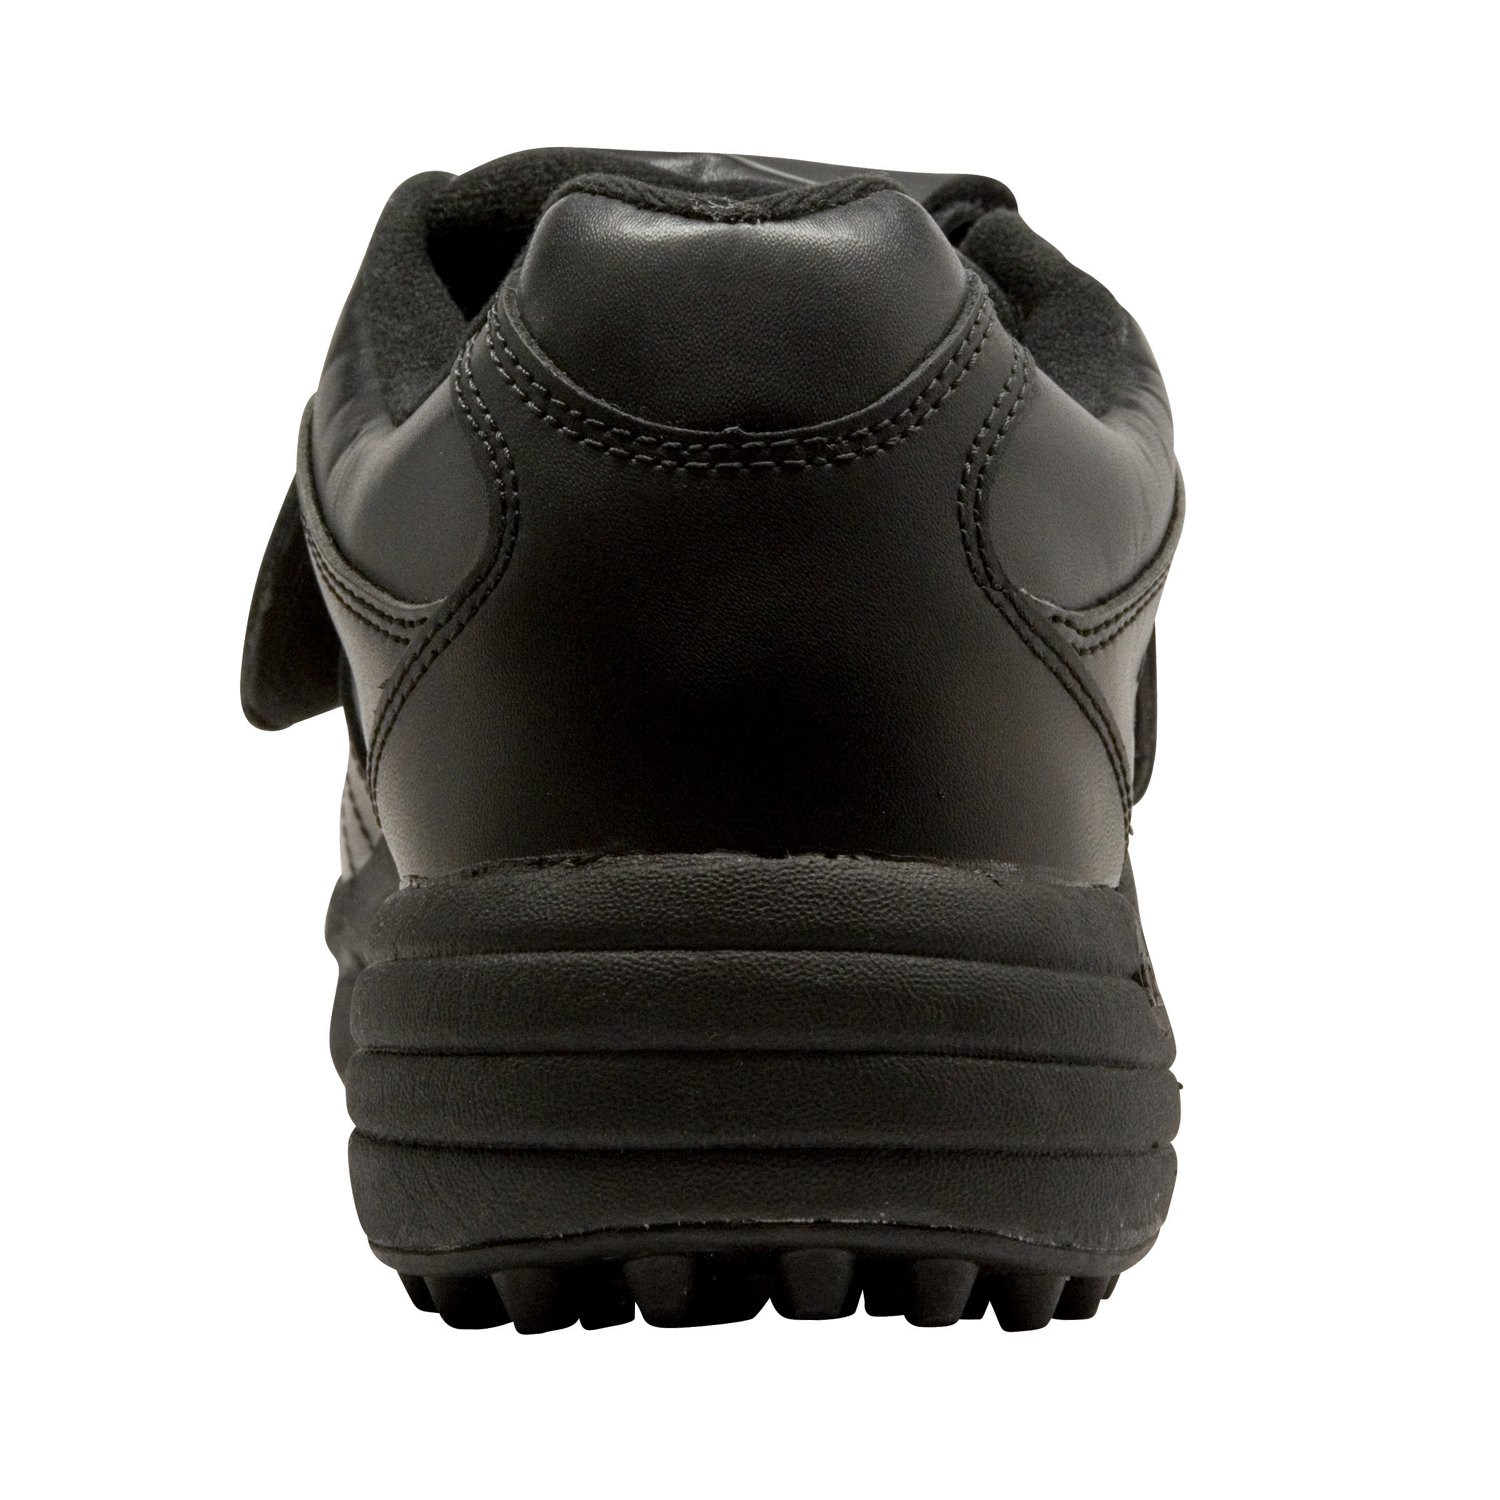 3N2 Men's Reaction Lo Umpire Shoes | Free Shipping at Academy